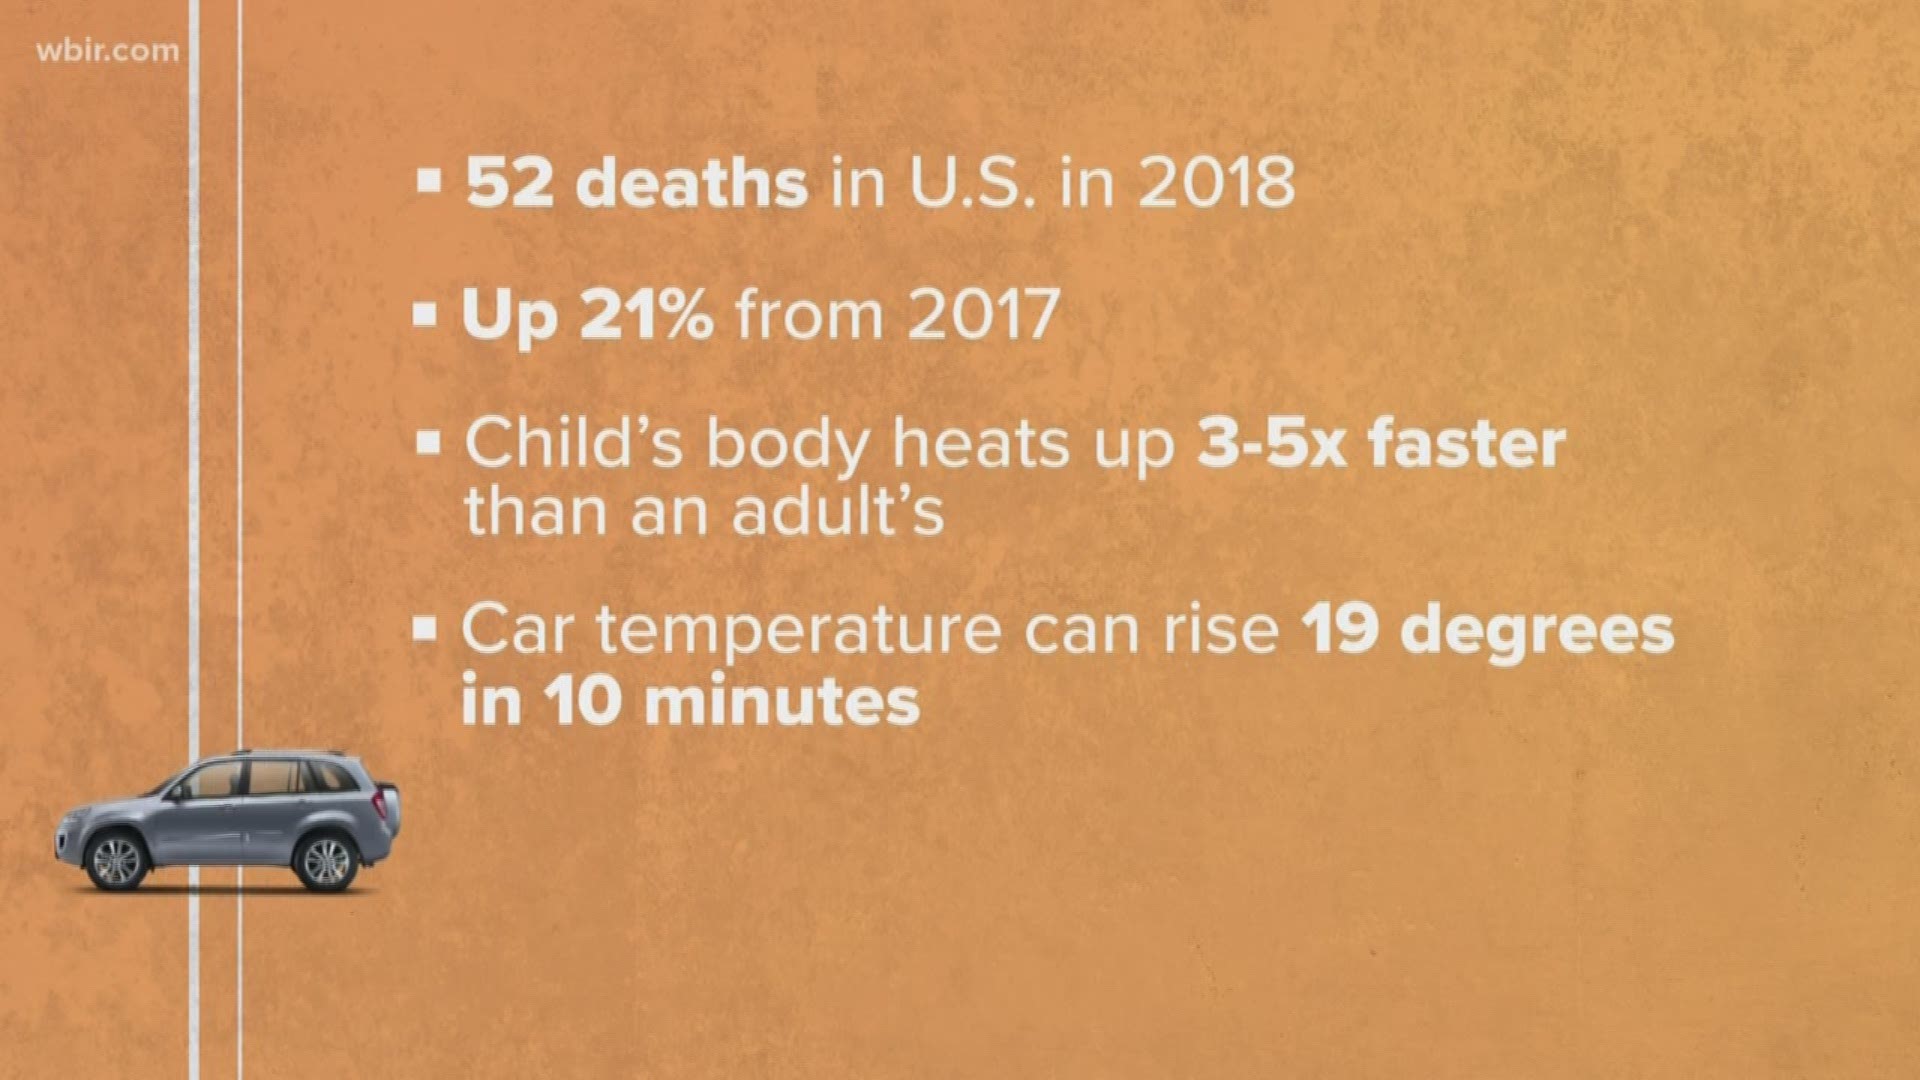 Tennessee ranks number 8 in the U.S. for most child hot car deaths with 33 fatalities in almost 40 years, but there are some simple memory tricks and lots of technology out there now that can prevent some of these deaths.